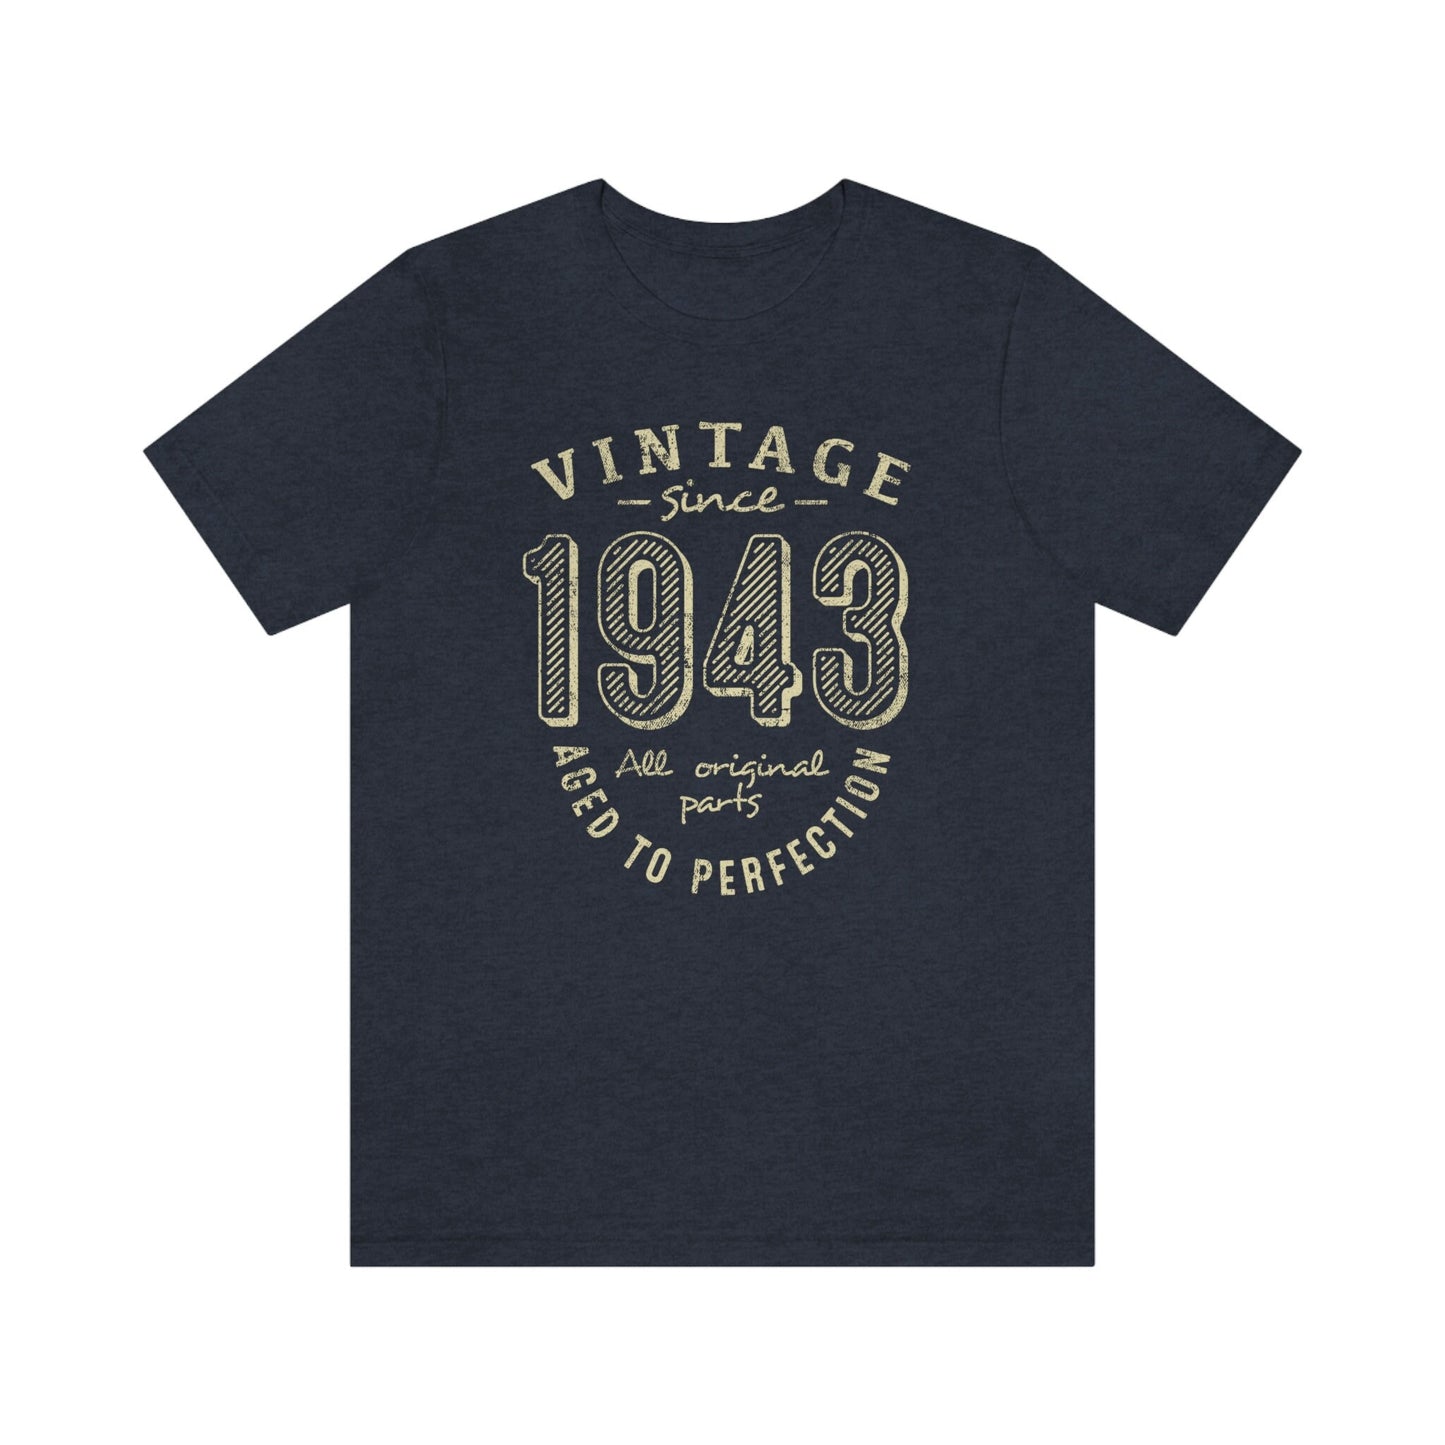 Vintage 1943 birthday shirt for dad or mom, Gift shirt for men or women